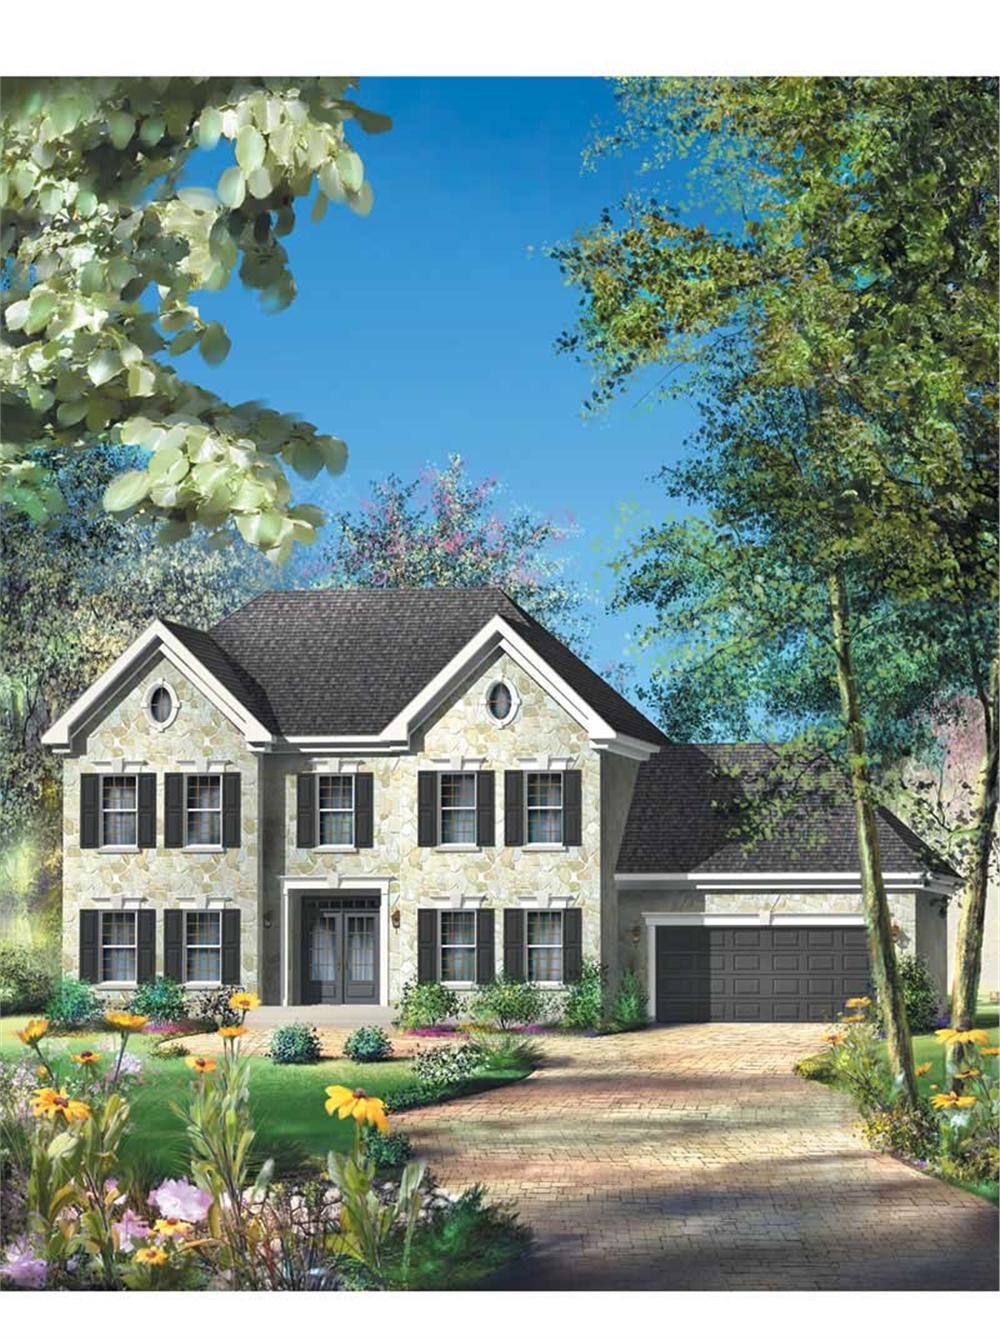 Luxury home (ThePlanCollection: Plan #157-1315)